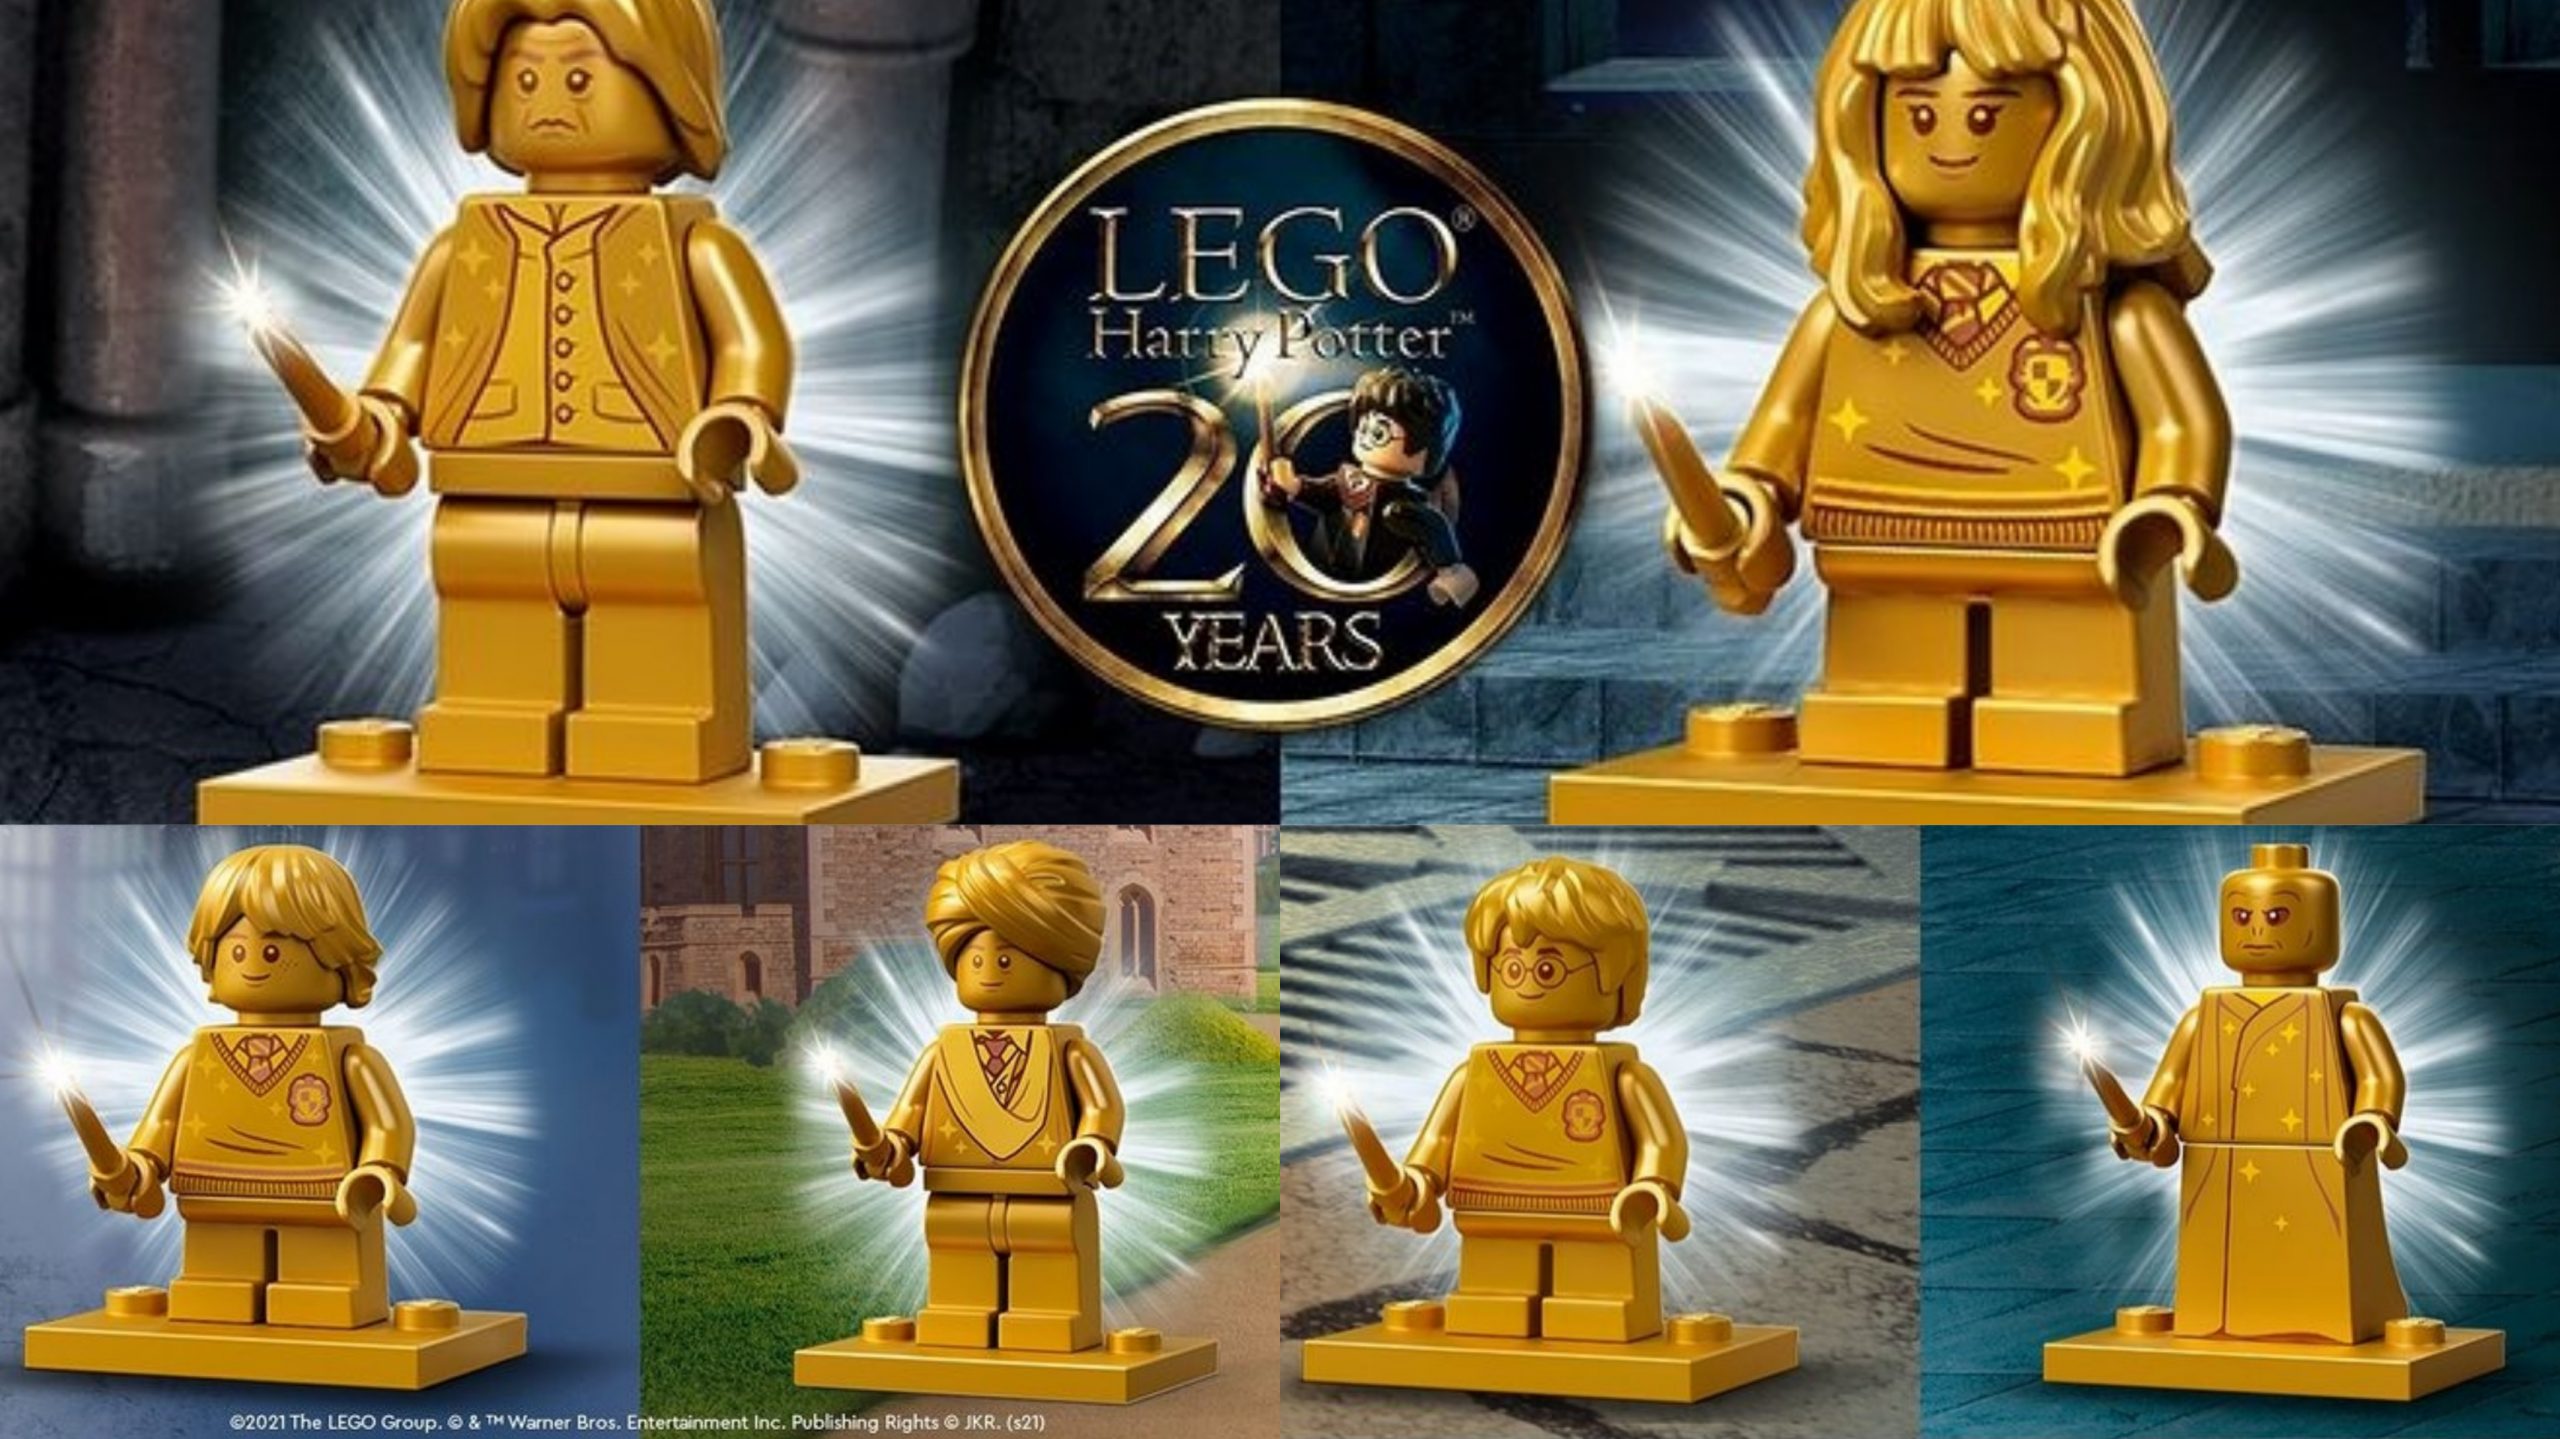 lego-harry-potter-20th-anniversary-golden-minifigures-revealed-the